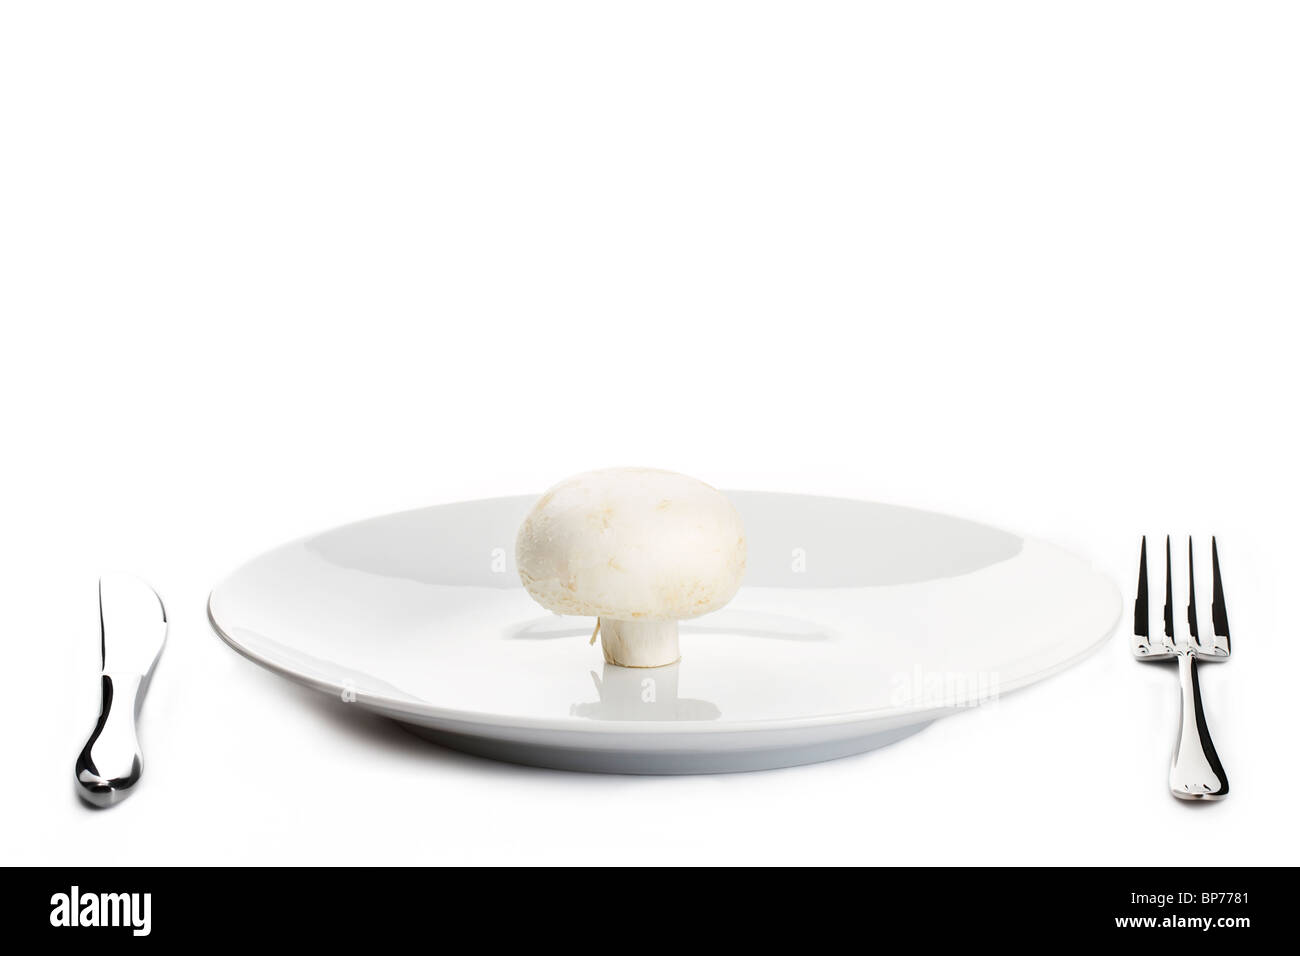 one white mushroom on a plate with knife and fork Stock Photo